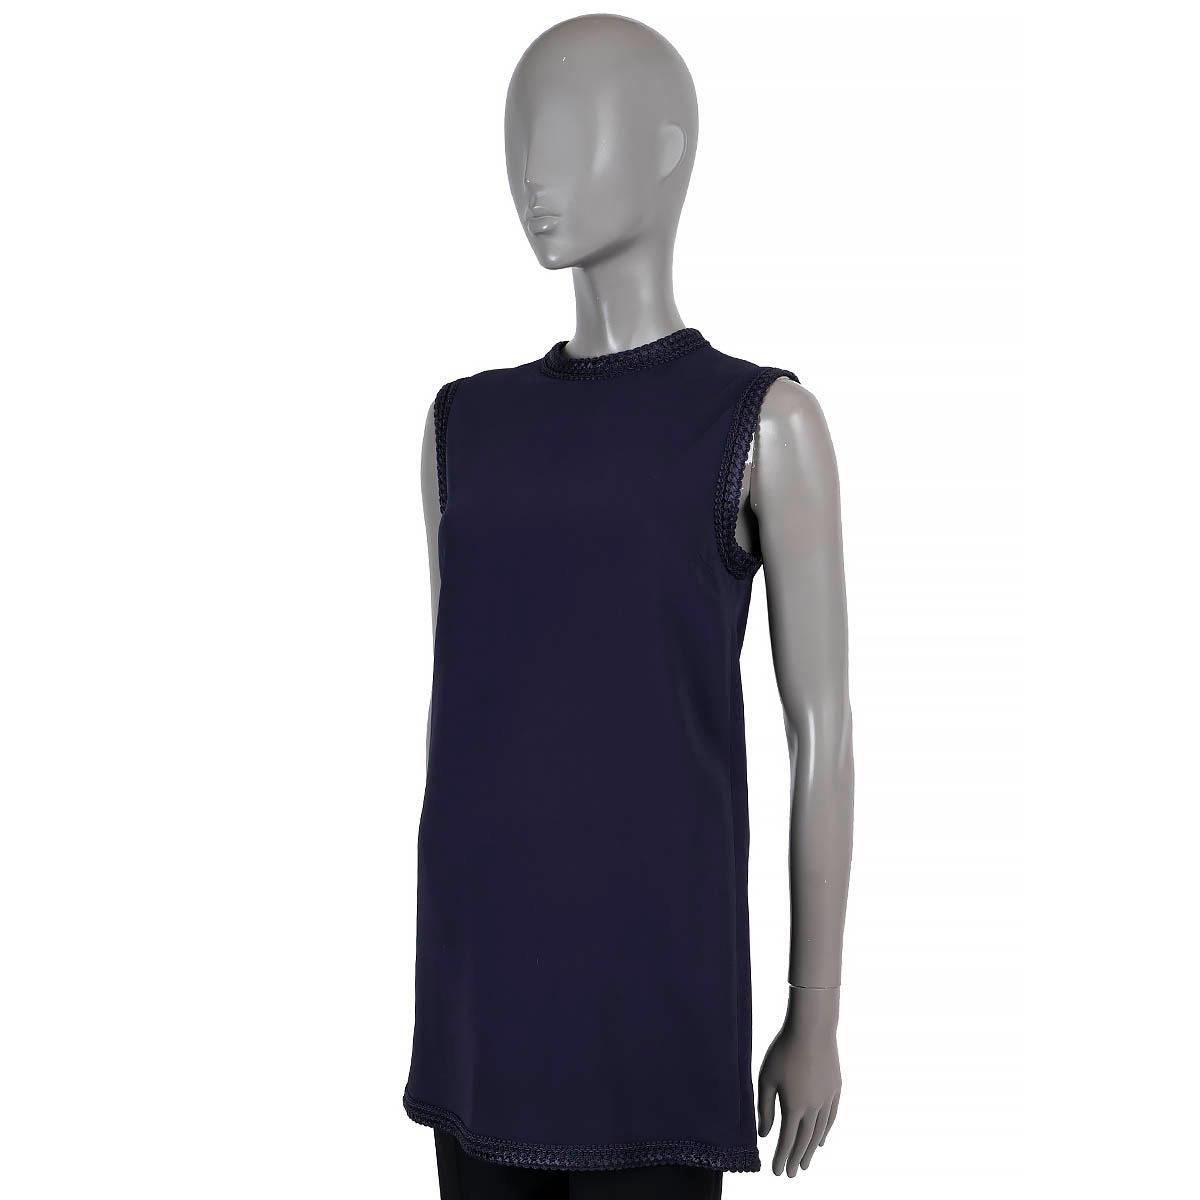 100% authenticGucci cady tunic top in navy blue viscose (97%) and elastane (3%). Features passementerie trims. Opens with a hook and zipper in the back. Unlined. Has been worn and is in excellent condition.

2019